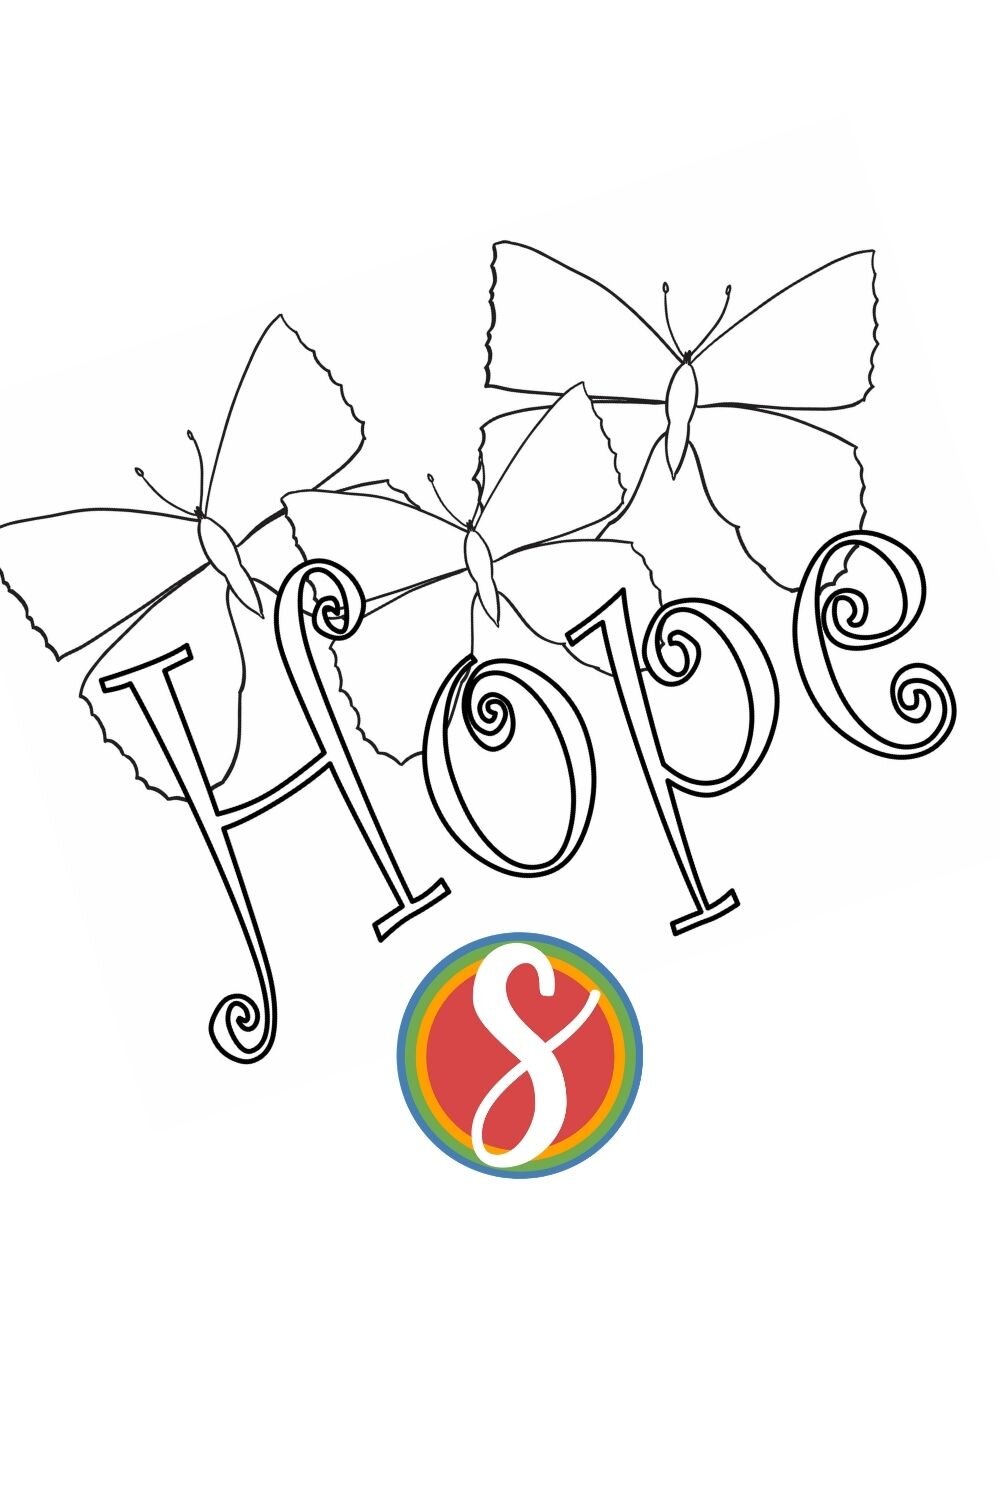 Hope with 3 Butterflies - free printable coloring page from Stevie Doodles